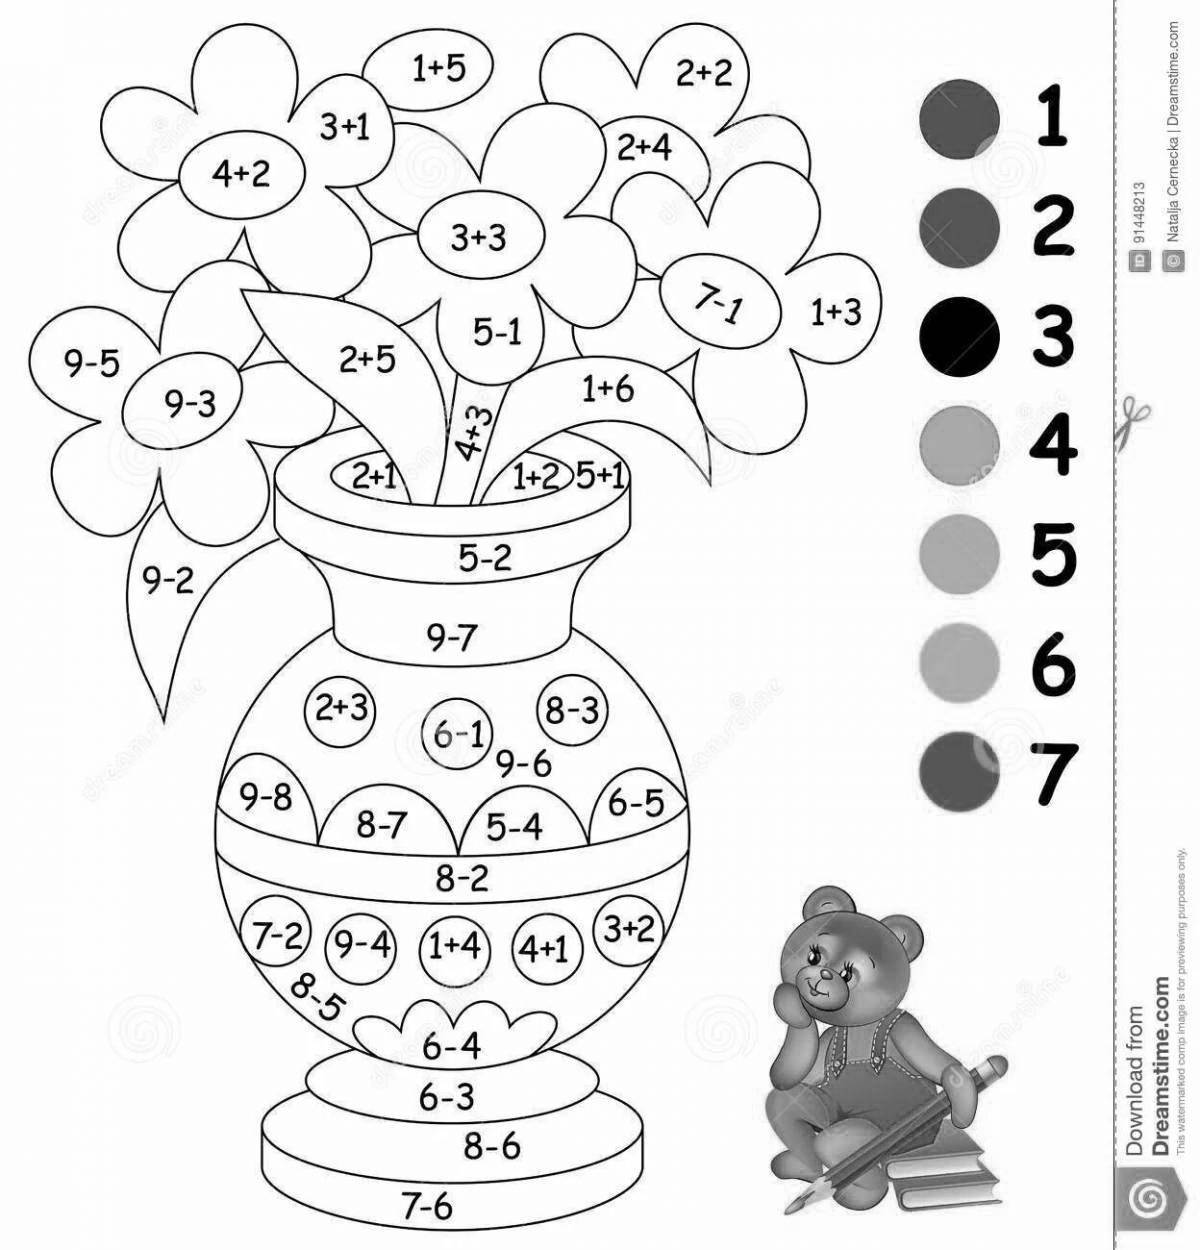 Fascinating counting within 5 coloring pages for preschoolers